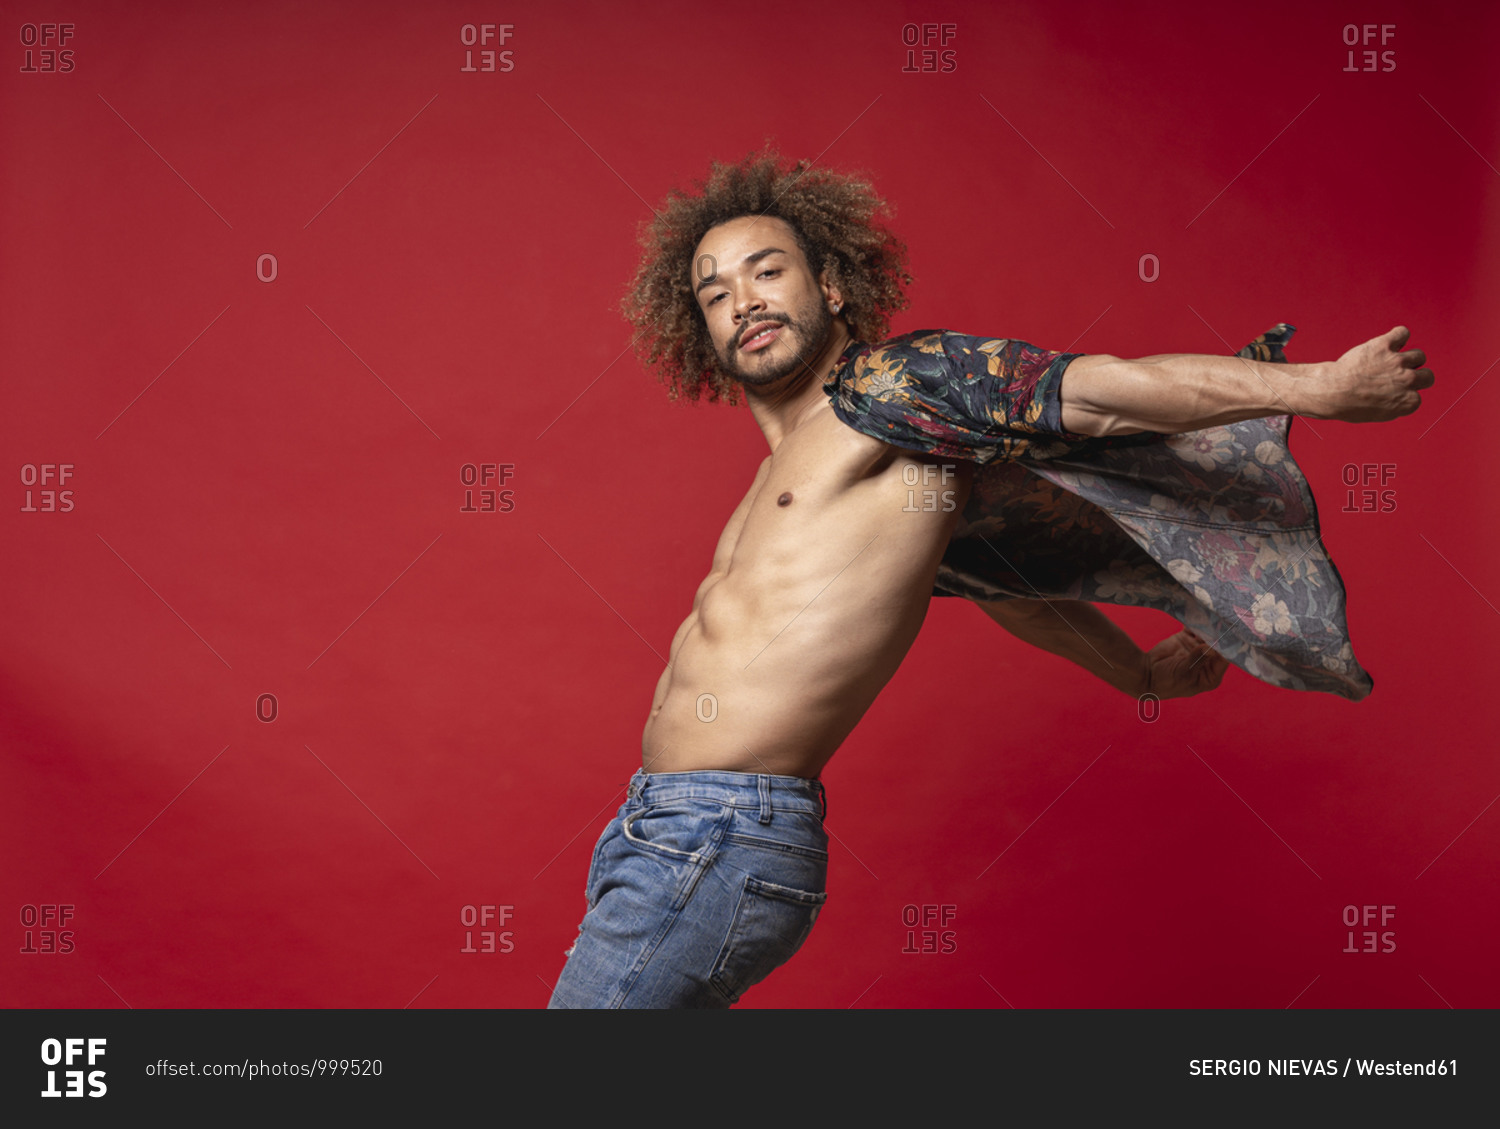 Young man wearing fully unbuttoned shirt dancing against red background